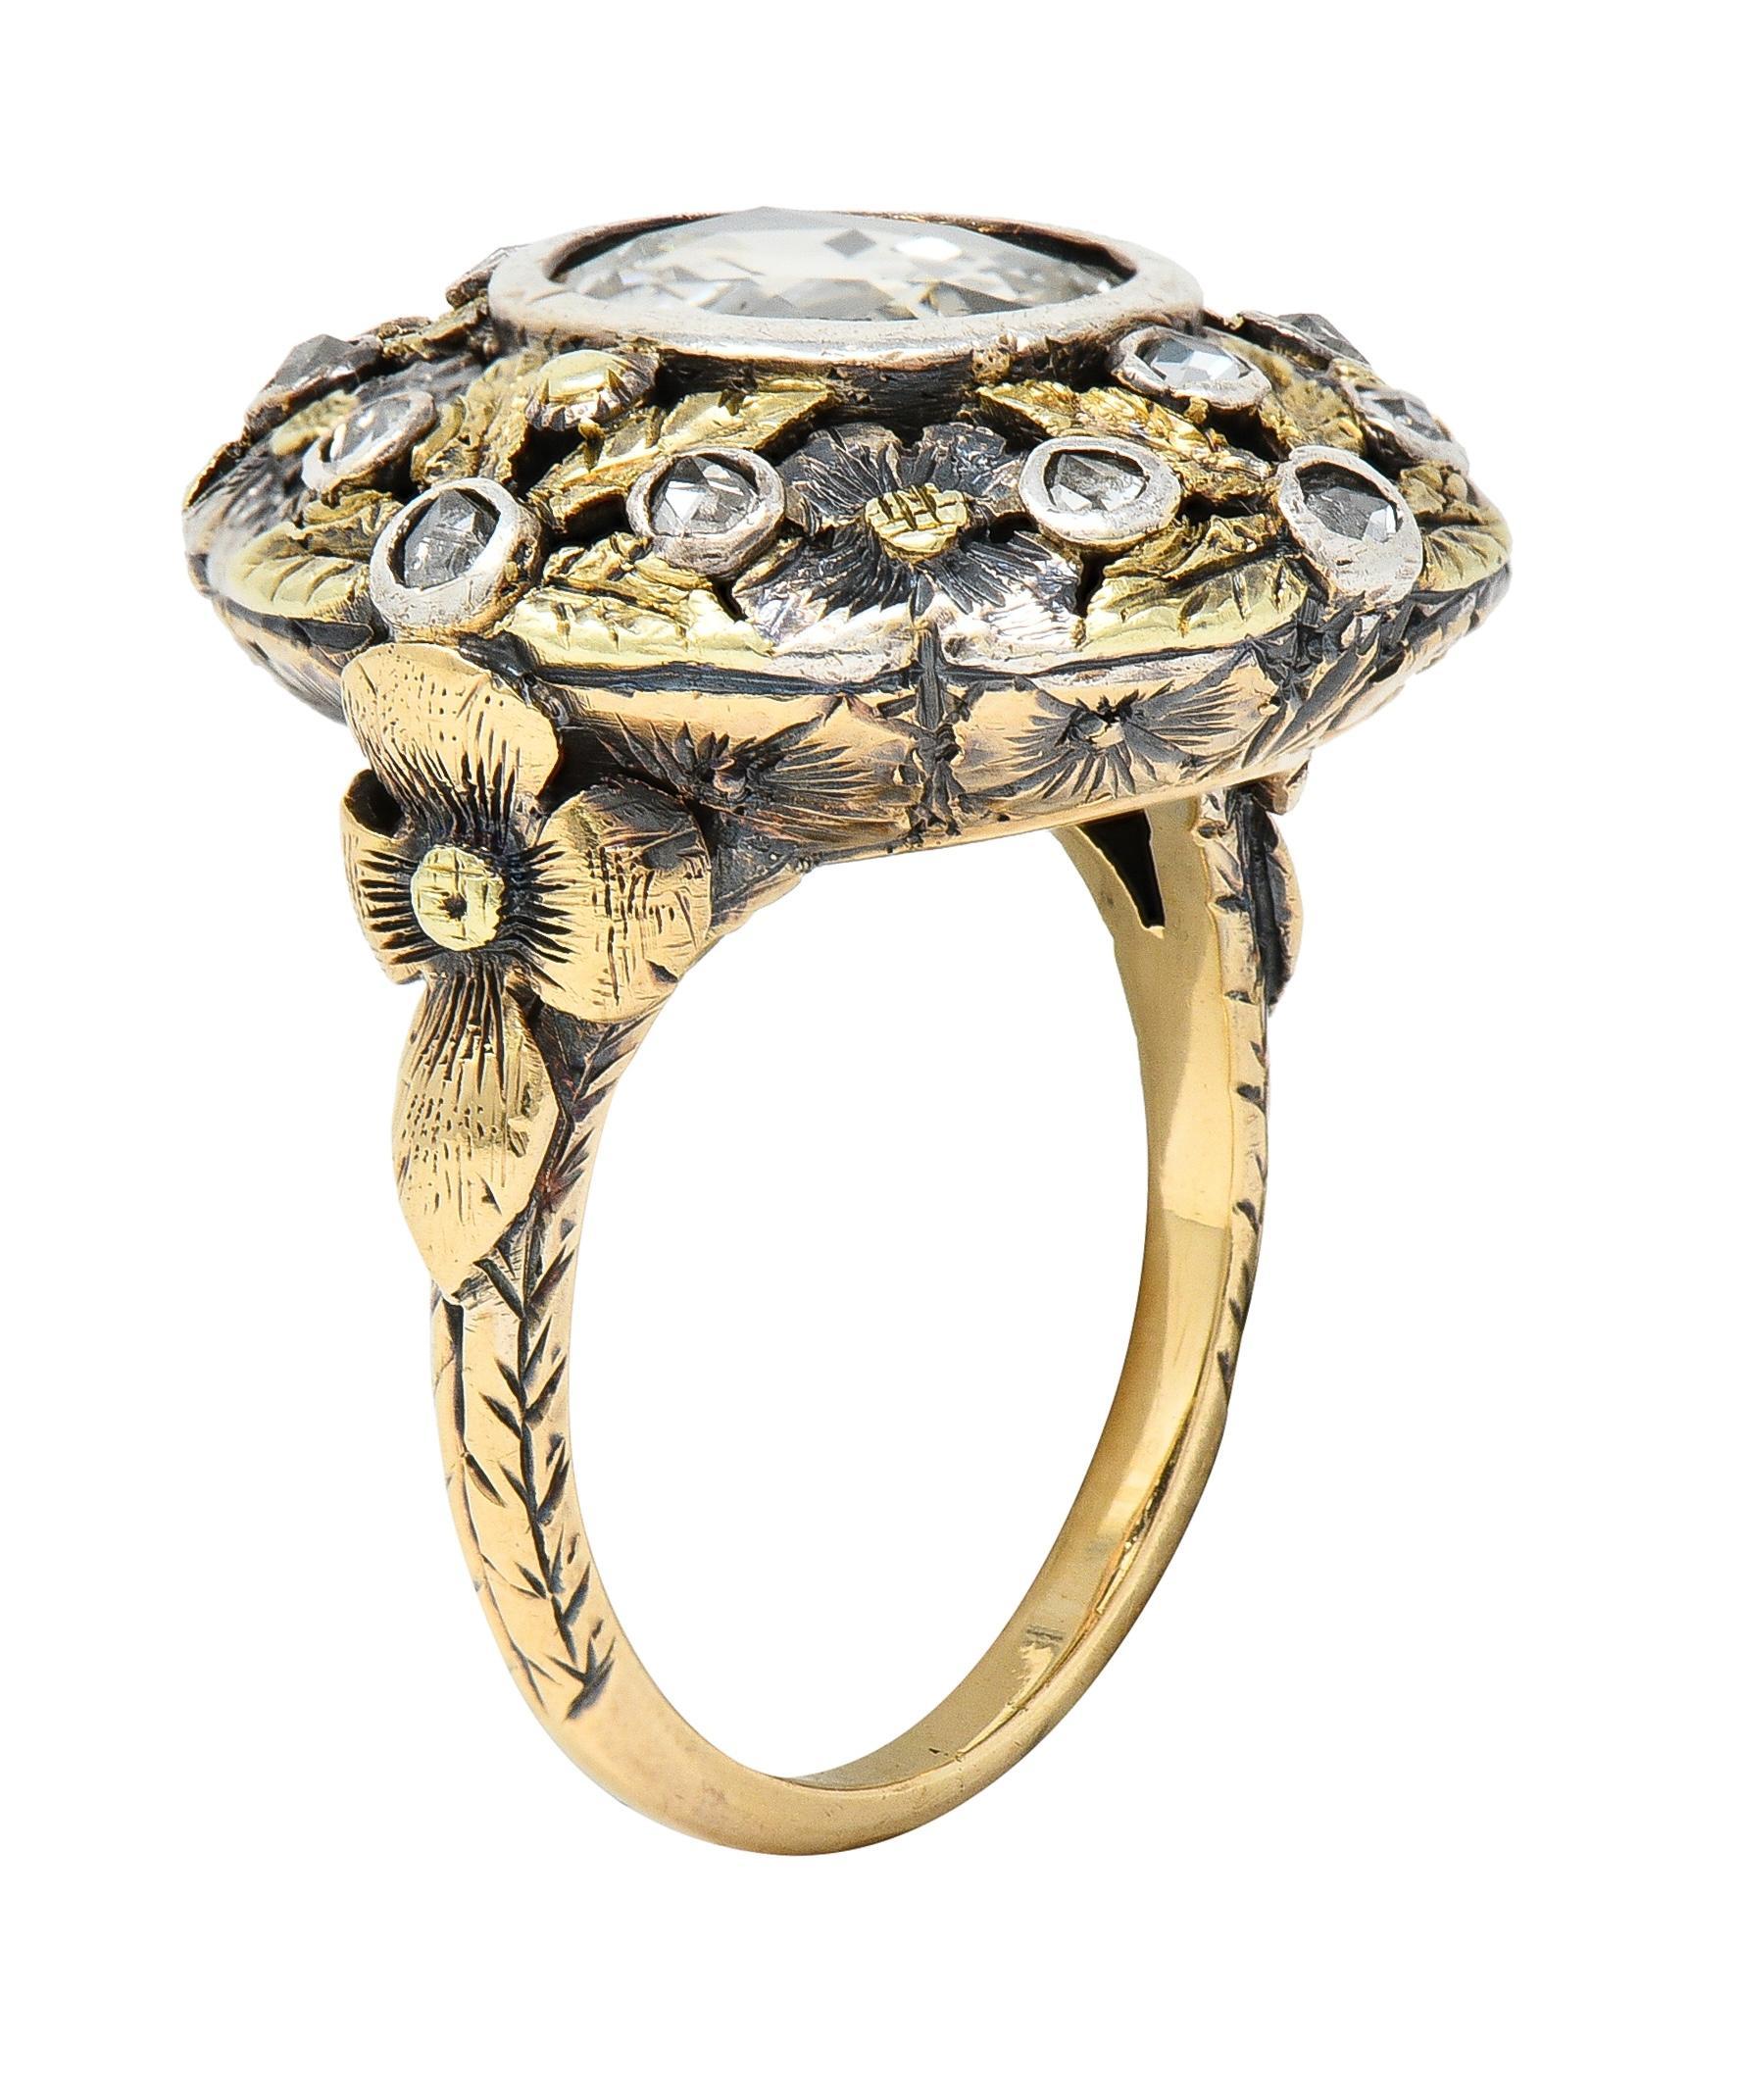 Centering an oval-shaped rose cut diamond weighing approximately 1.02 carats - bezel set
With a pierced domed surround of silver and gold floral and foliate motifs with engraved detail
Featuring an additional rose cut diamonds bezel set throughout